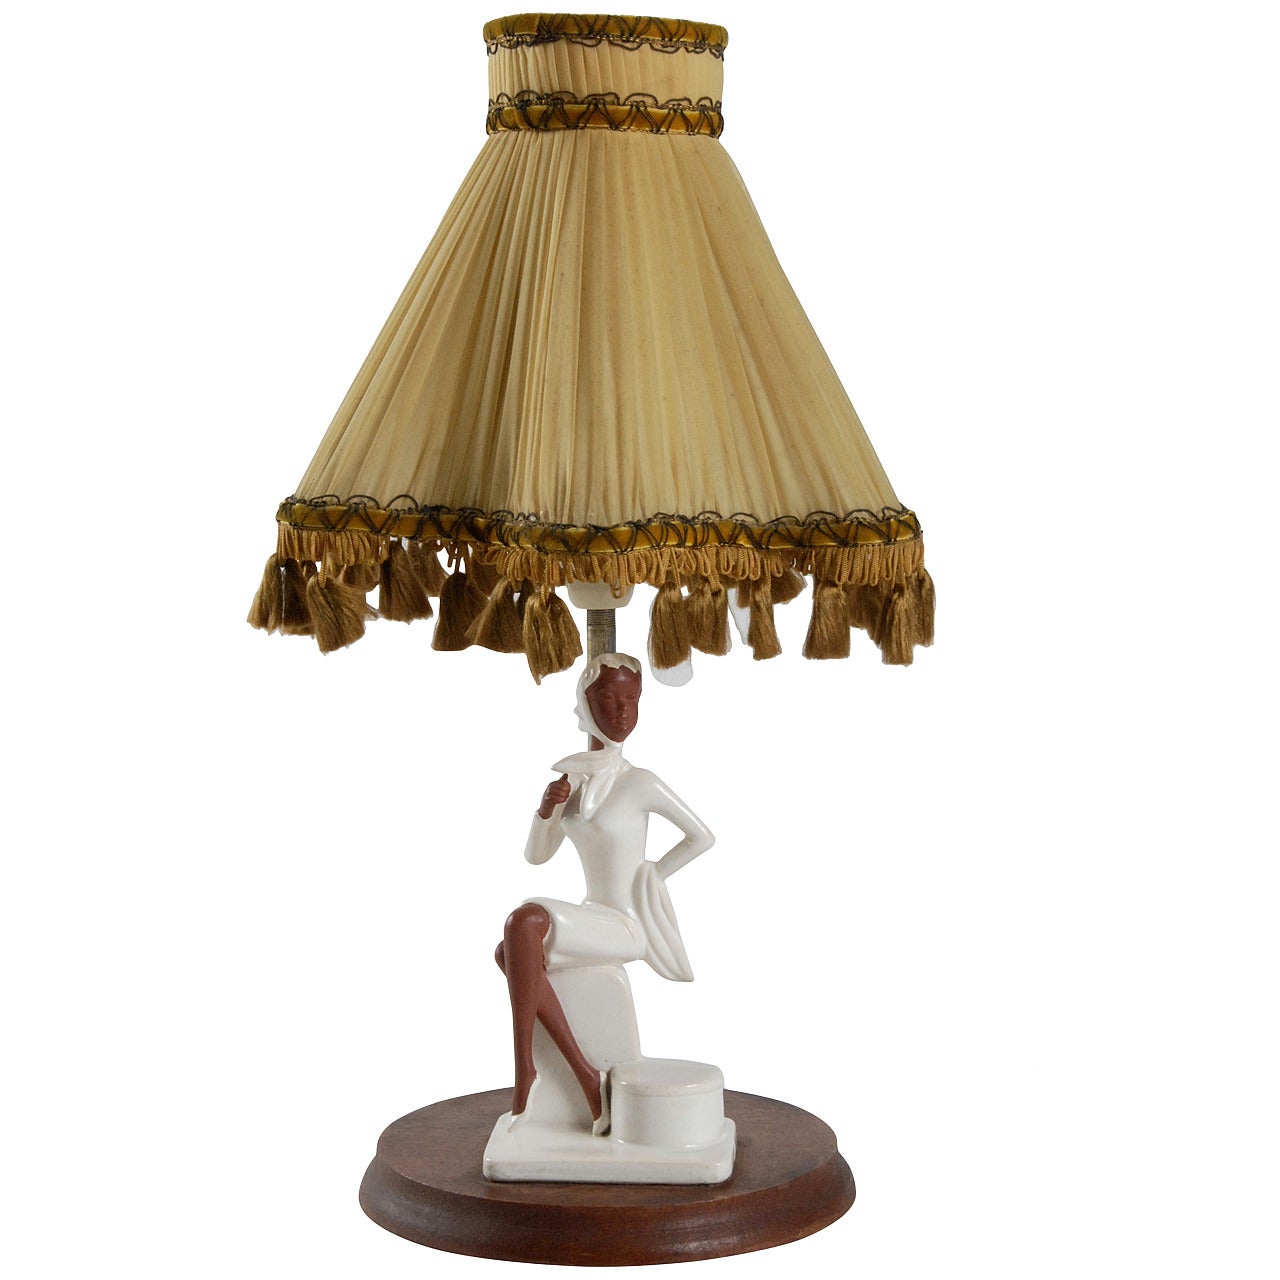 Mid-20th Century Jema, Netherlands Table Lamp For Sale